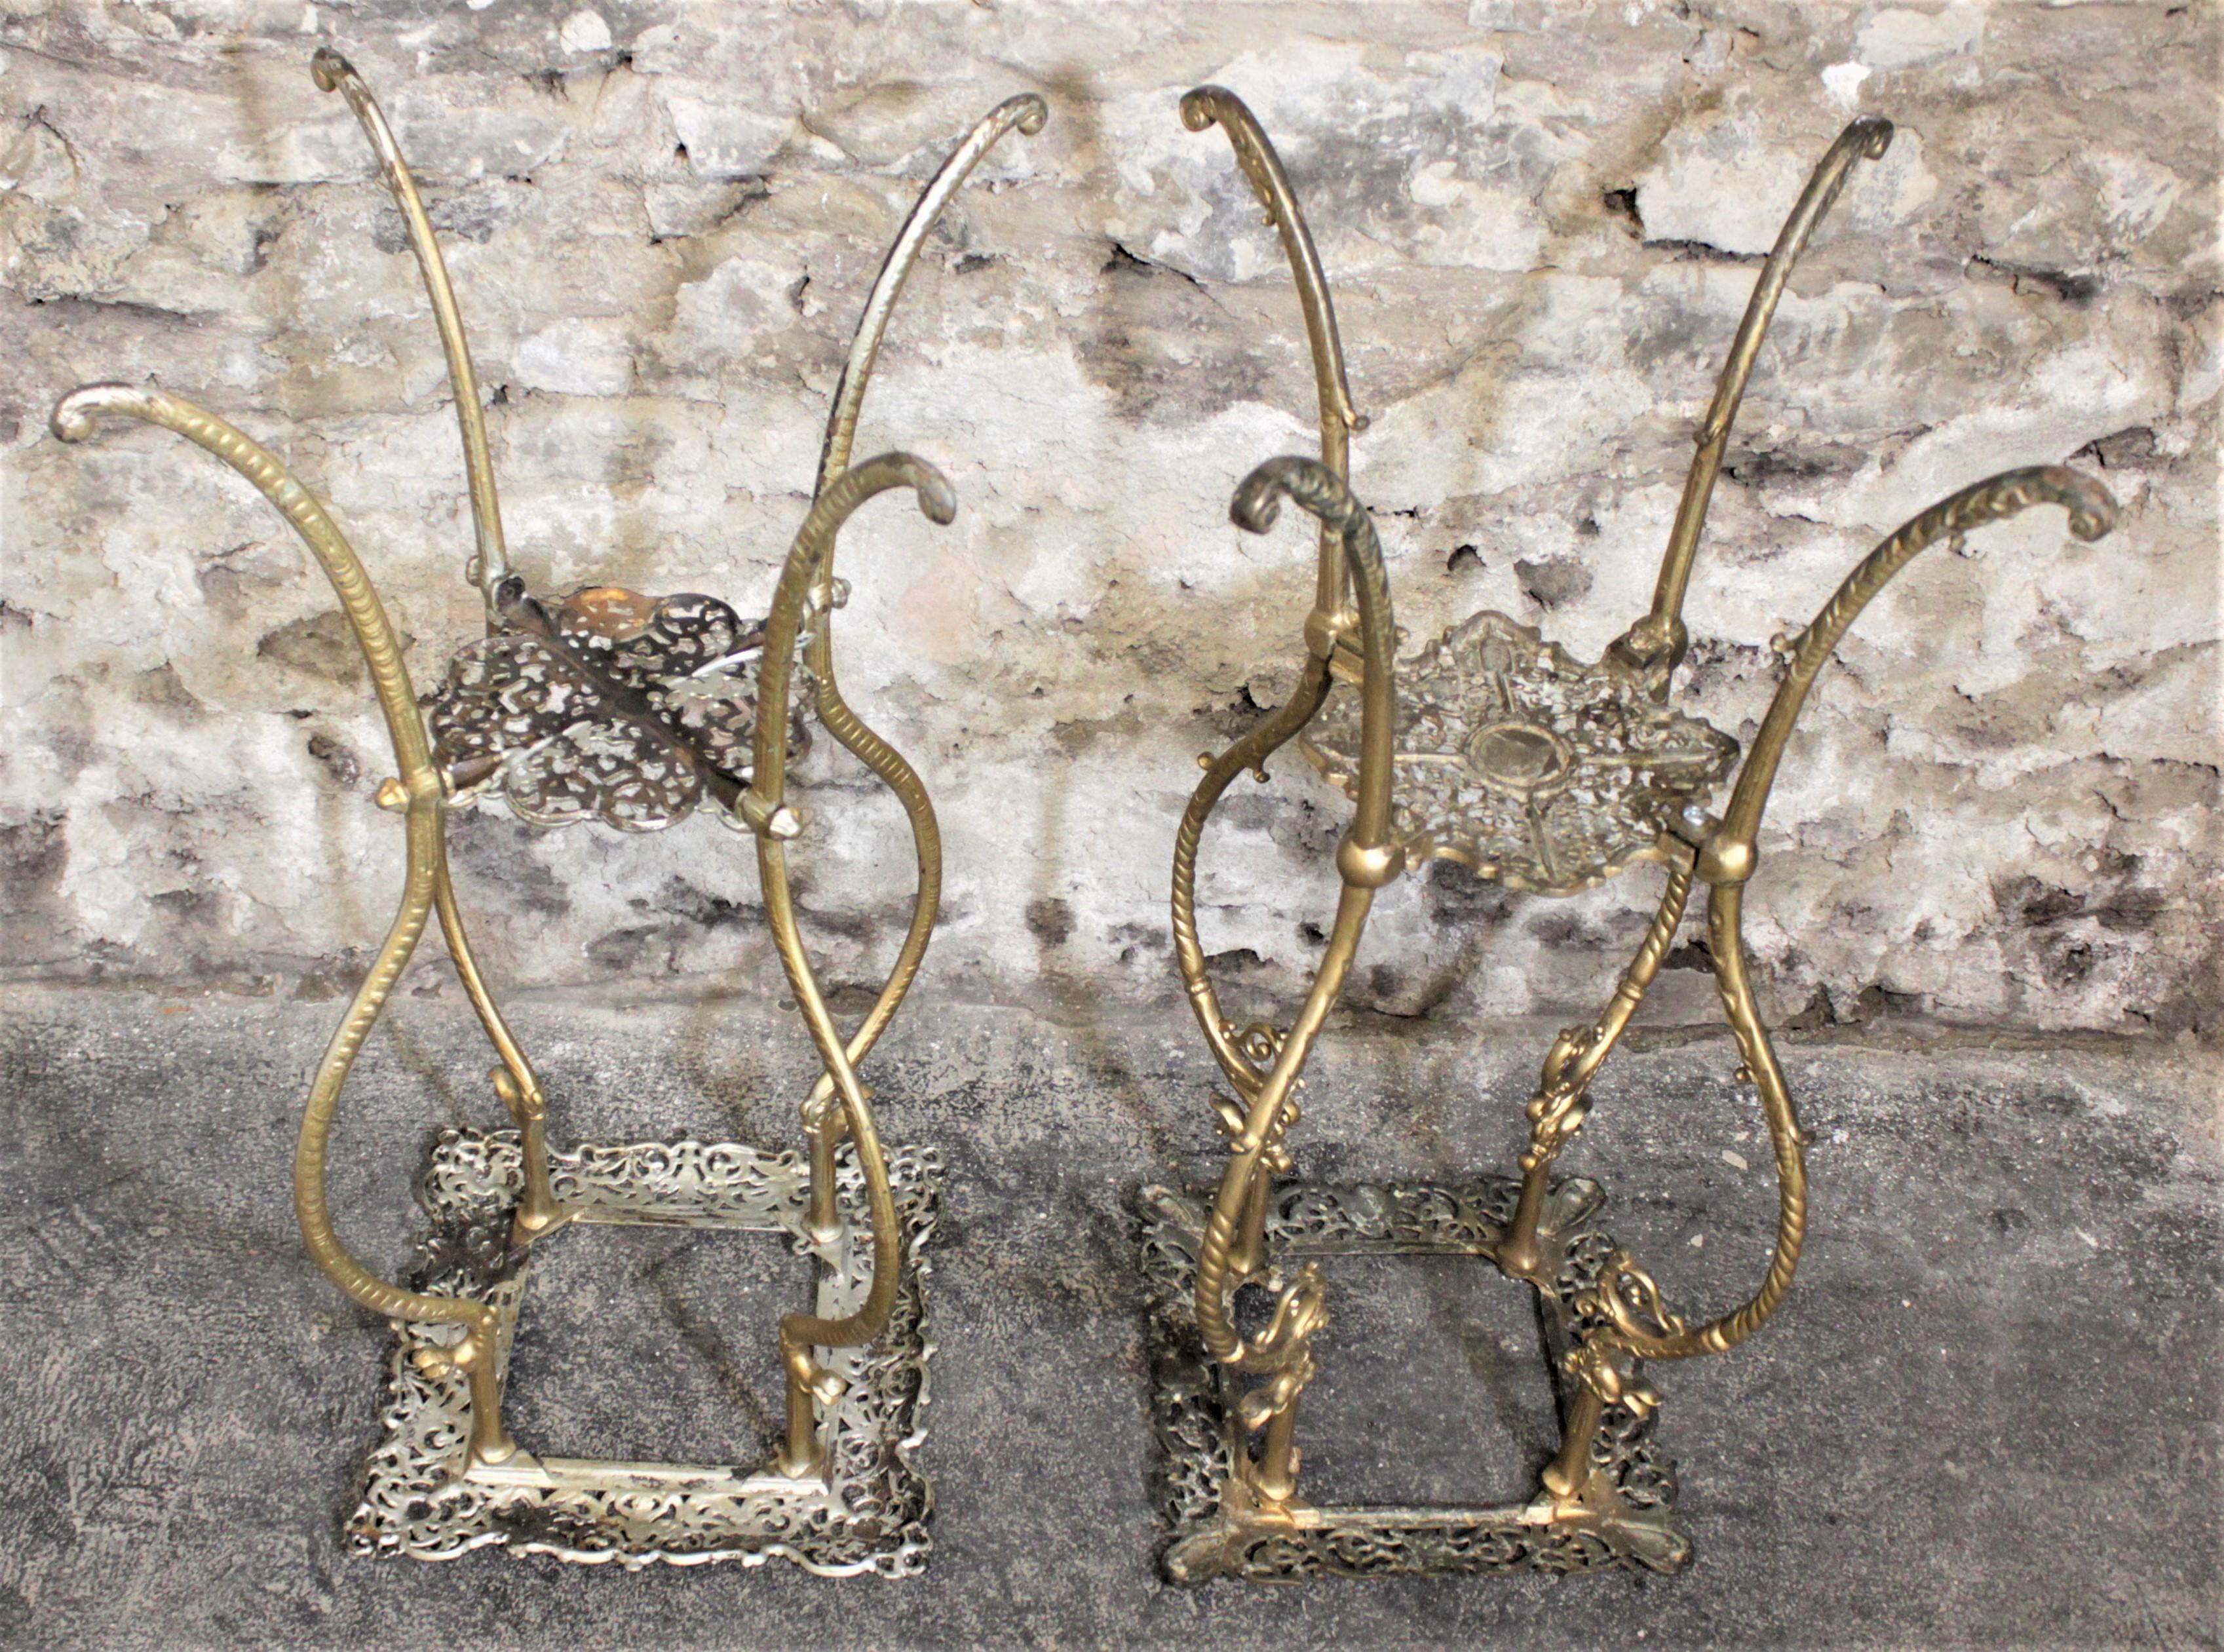 Pair of Antique Cast Metal Plant Stands or Pedestals with Figural Dragon Accents For Sale 9